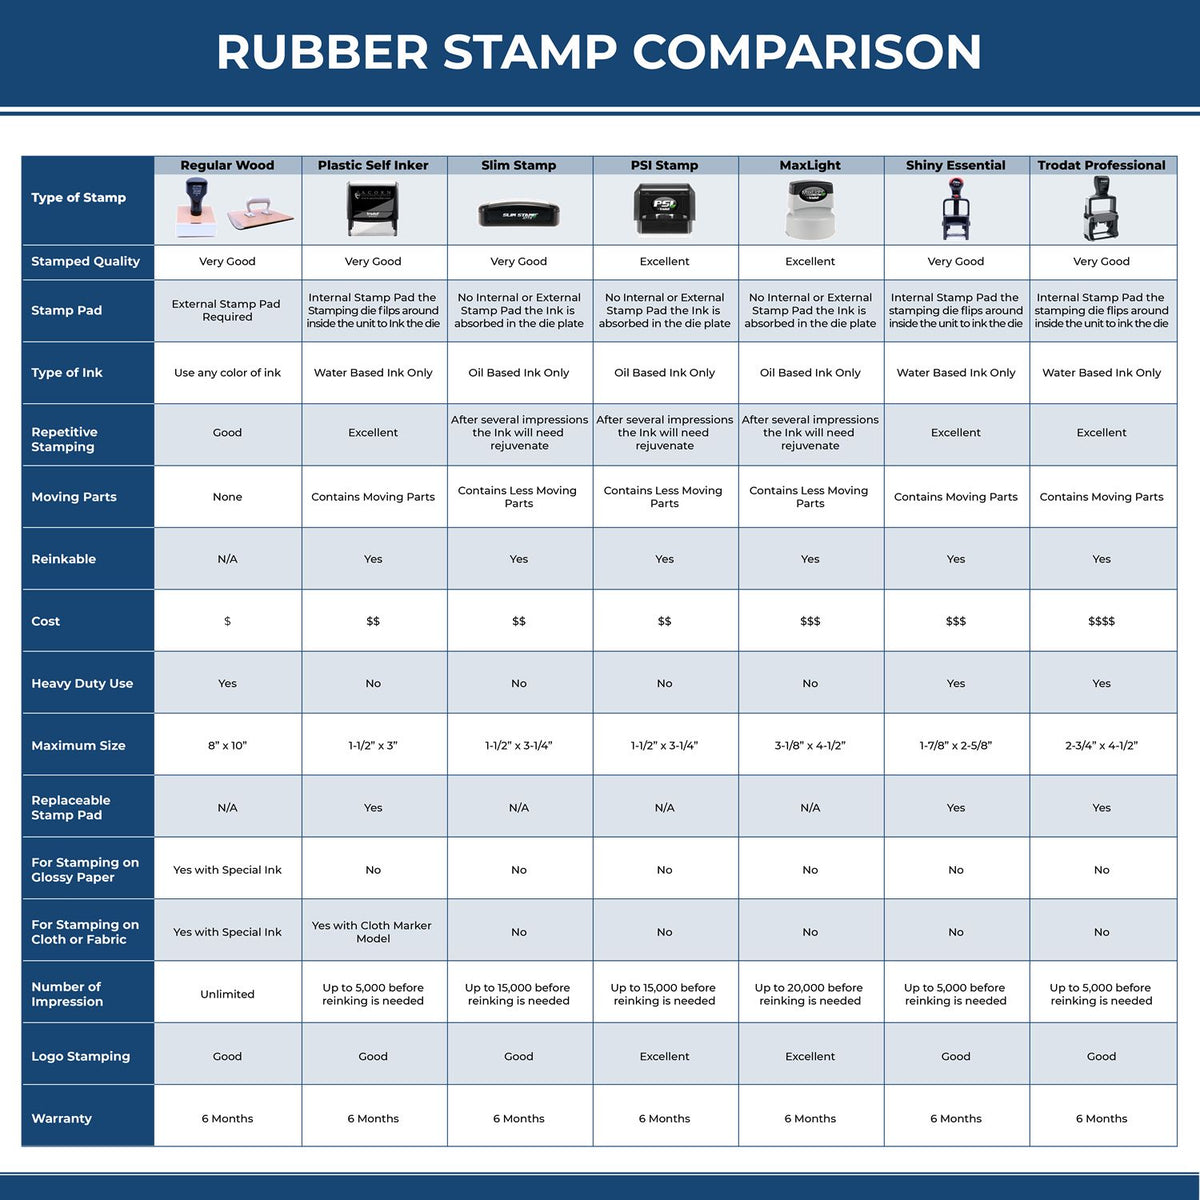 Large Self-Inking Narrow Font Approved for Payment Stamp 4892S Rubber Stamp Comparison